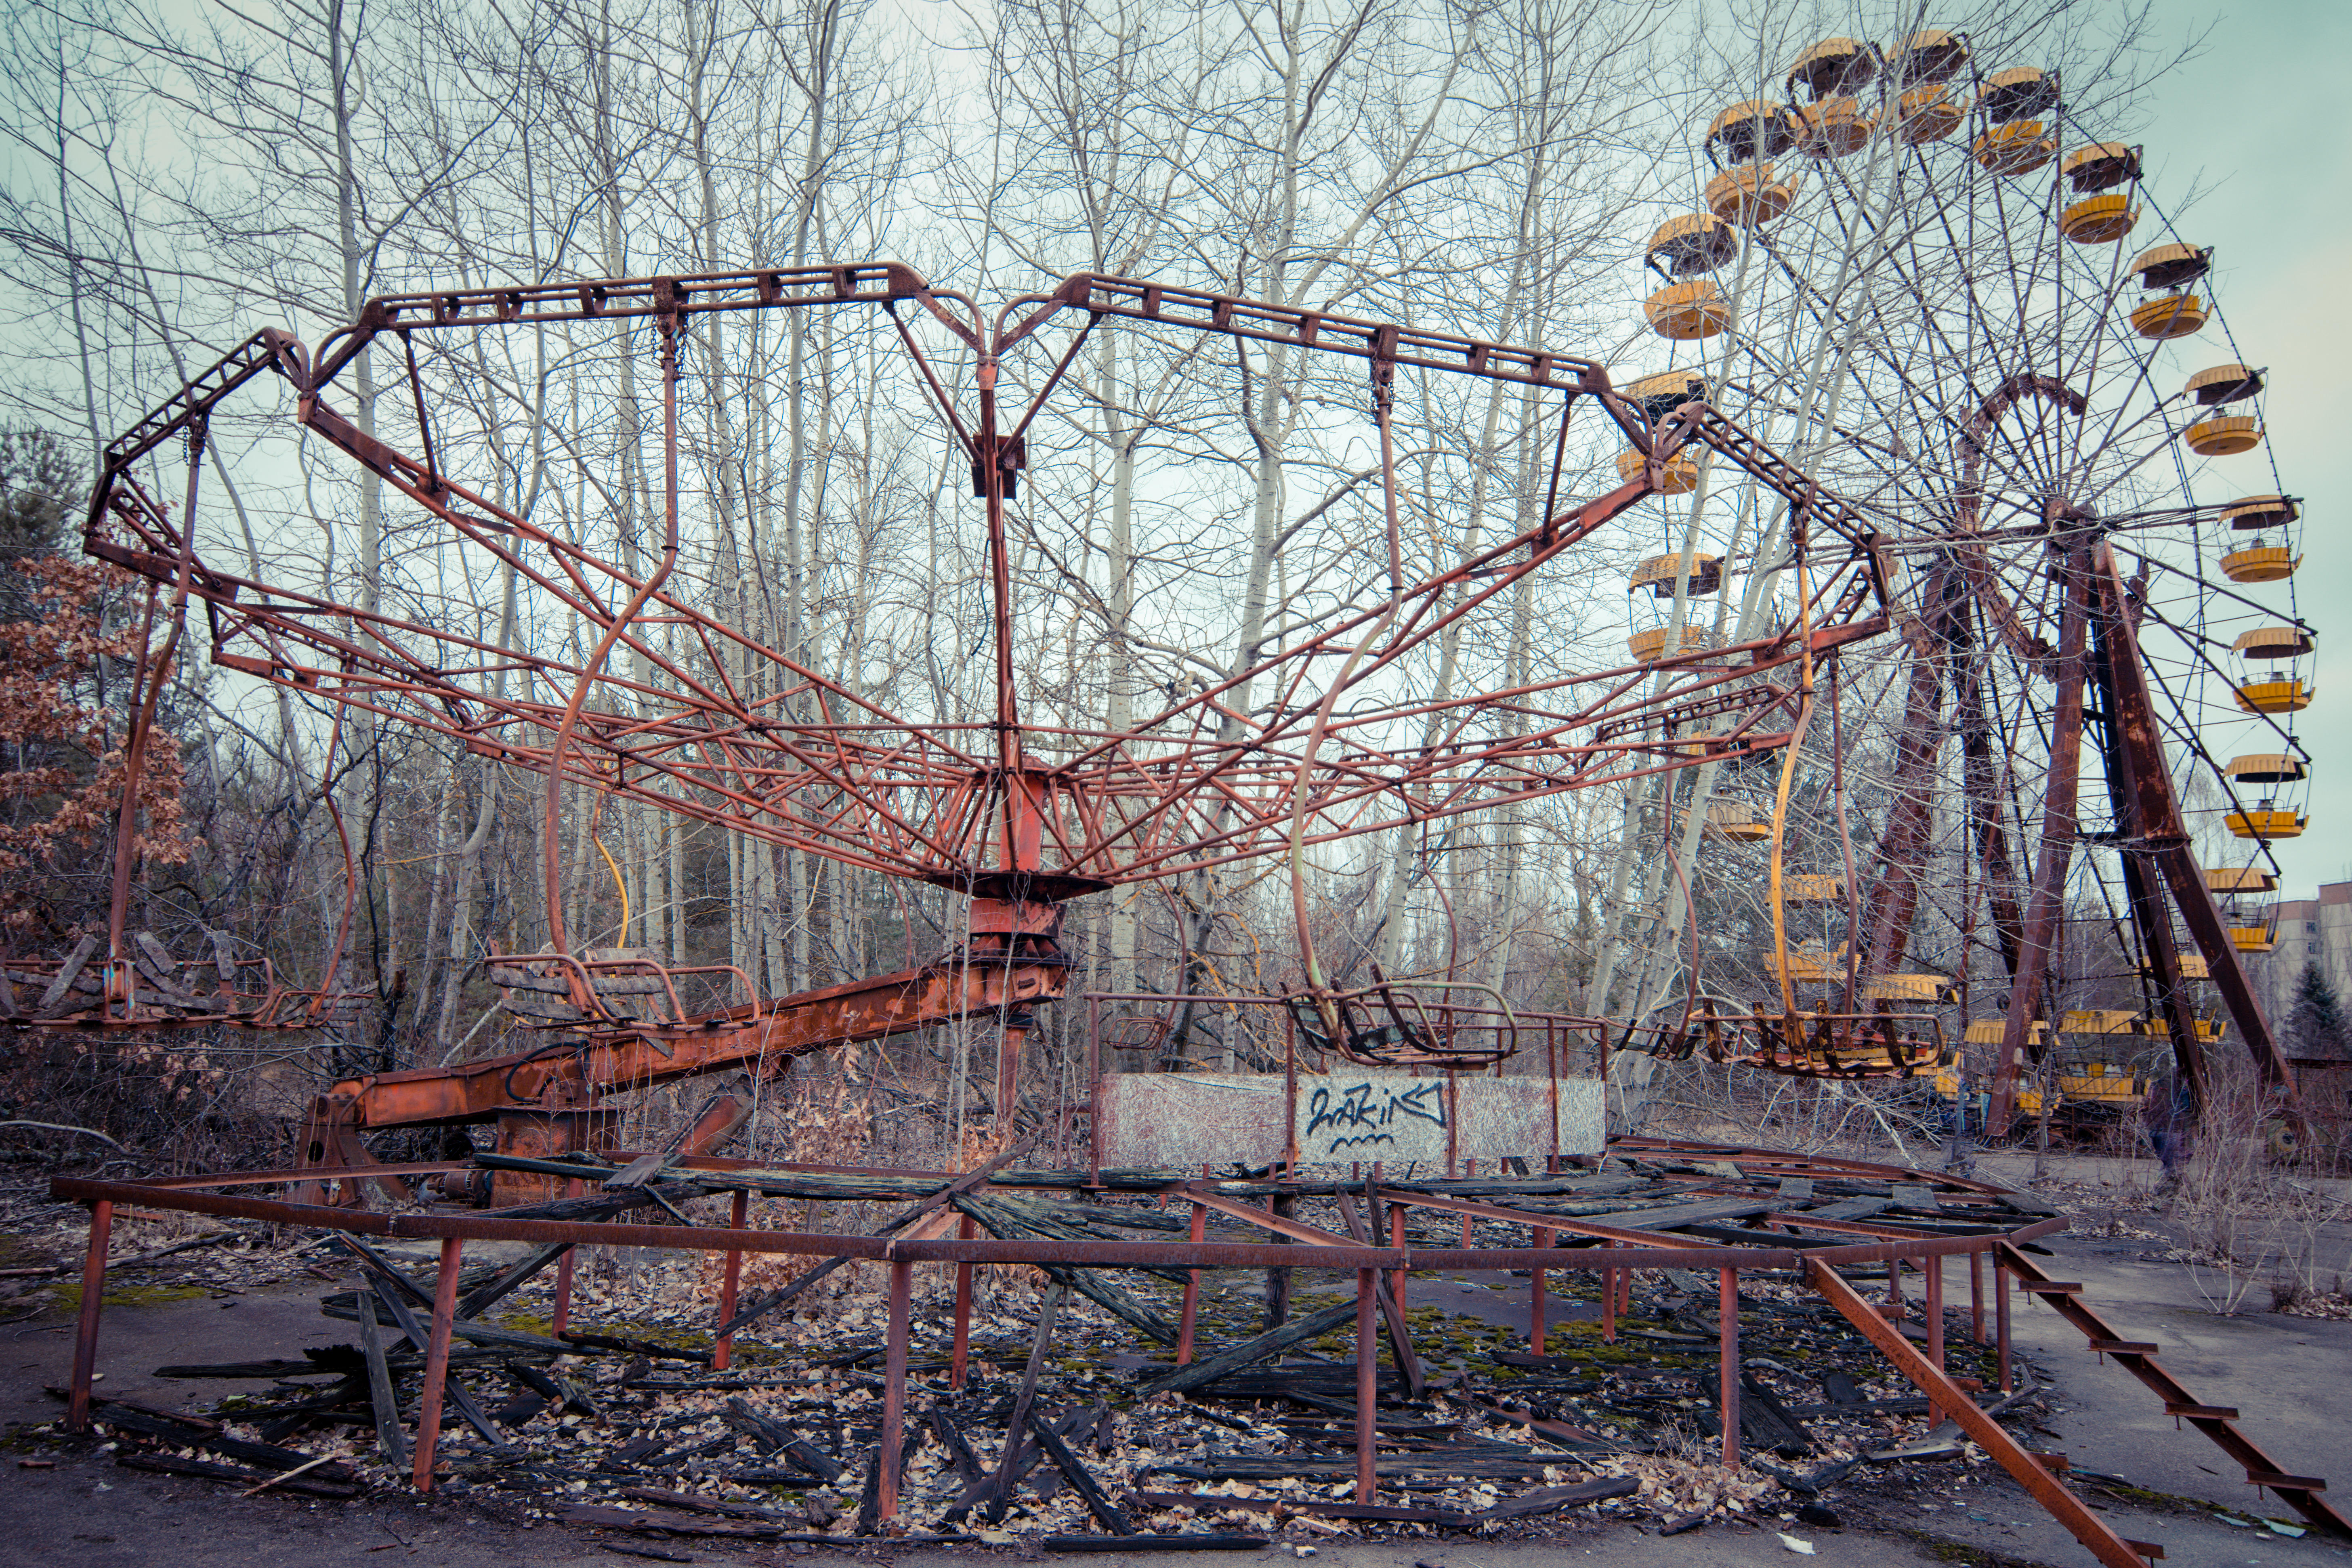 The rides were never used prior to the Chernobyl disaster